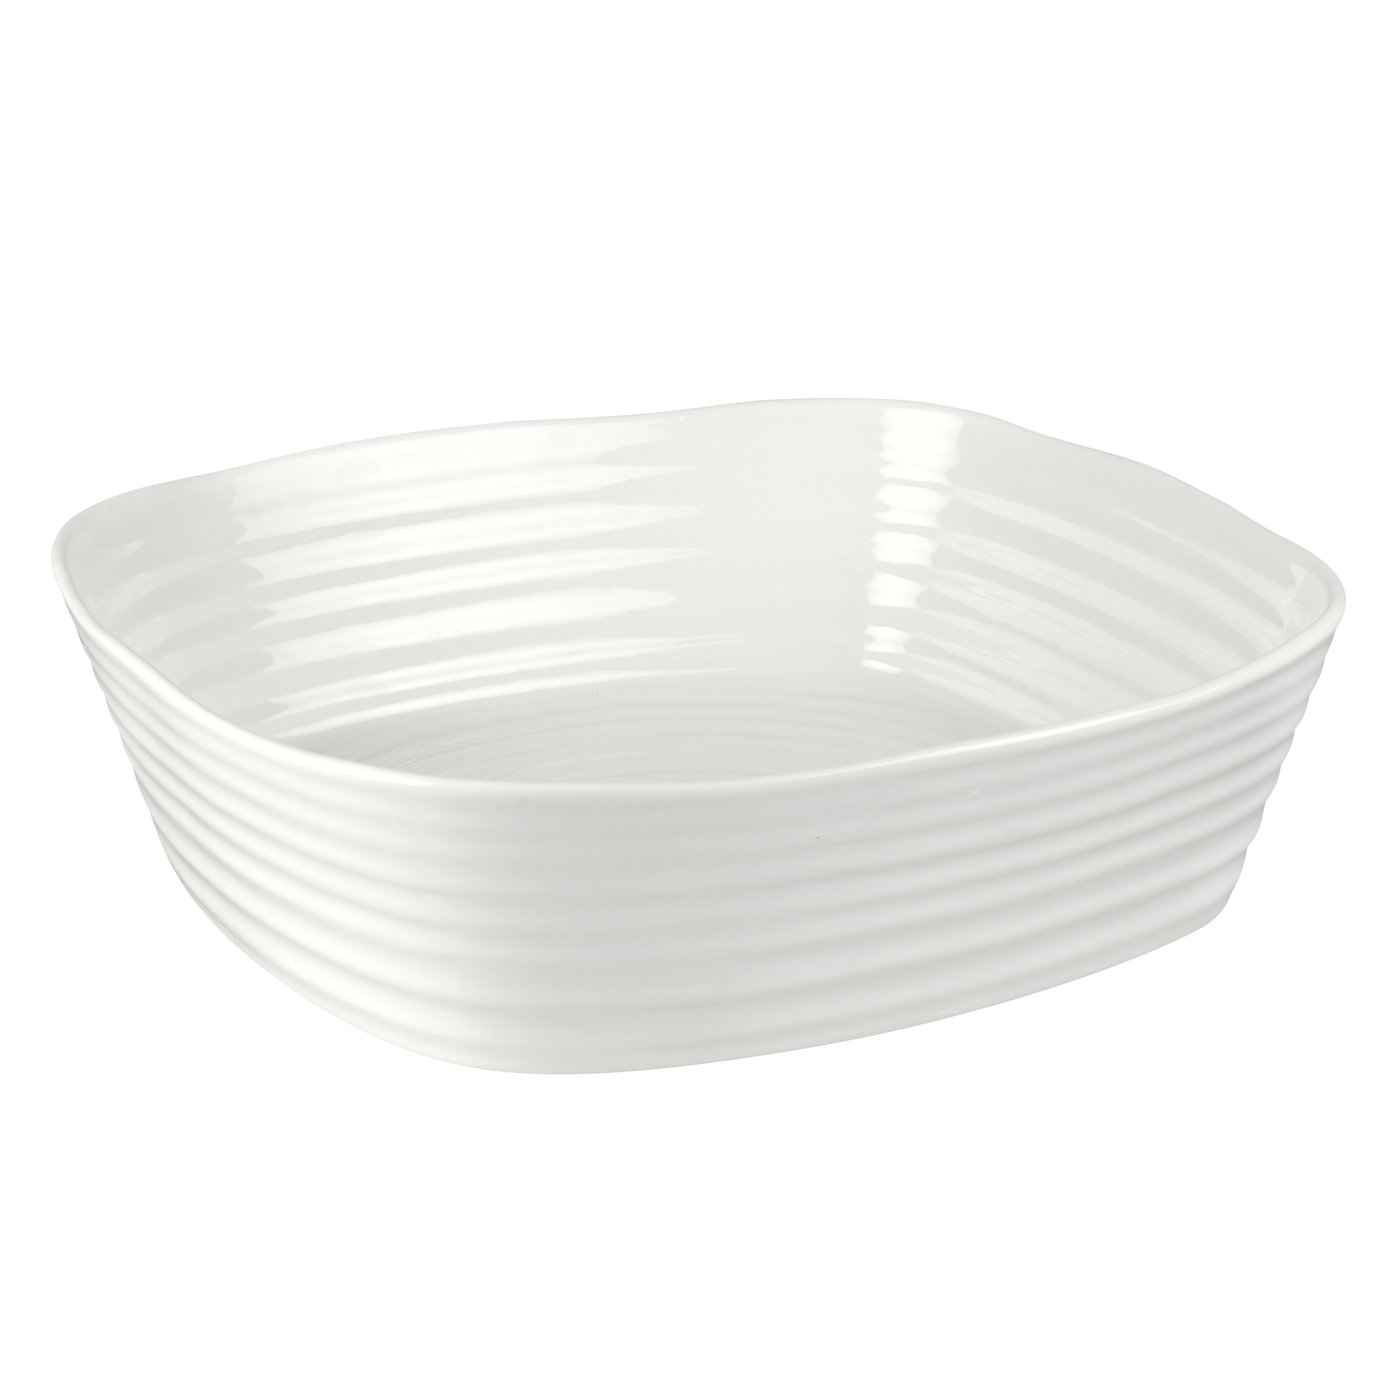 Sophie Conran White 11 Inch Square Roaster image number null